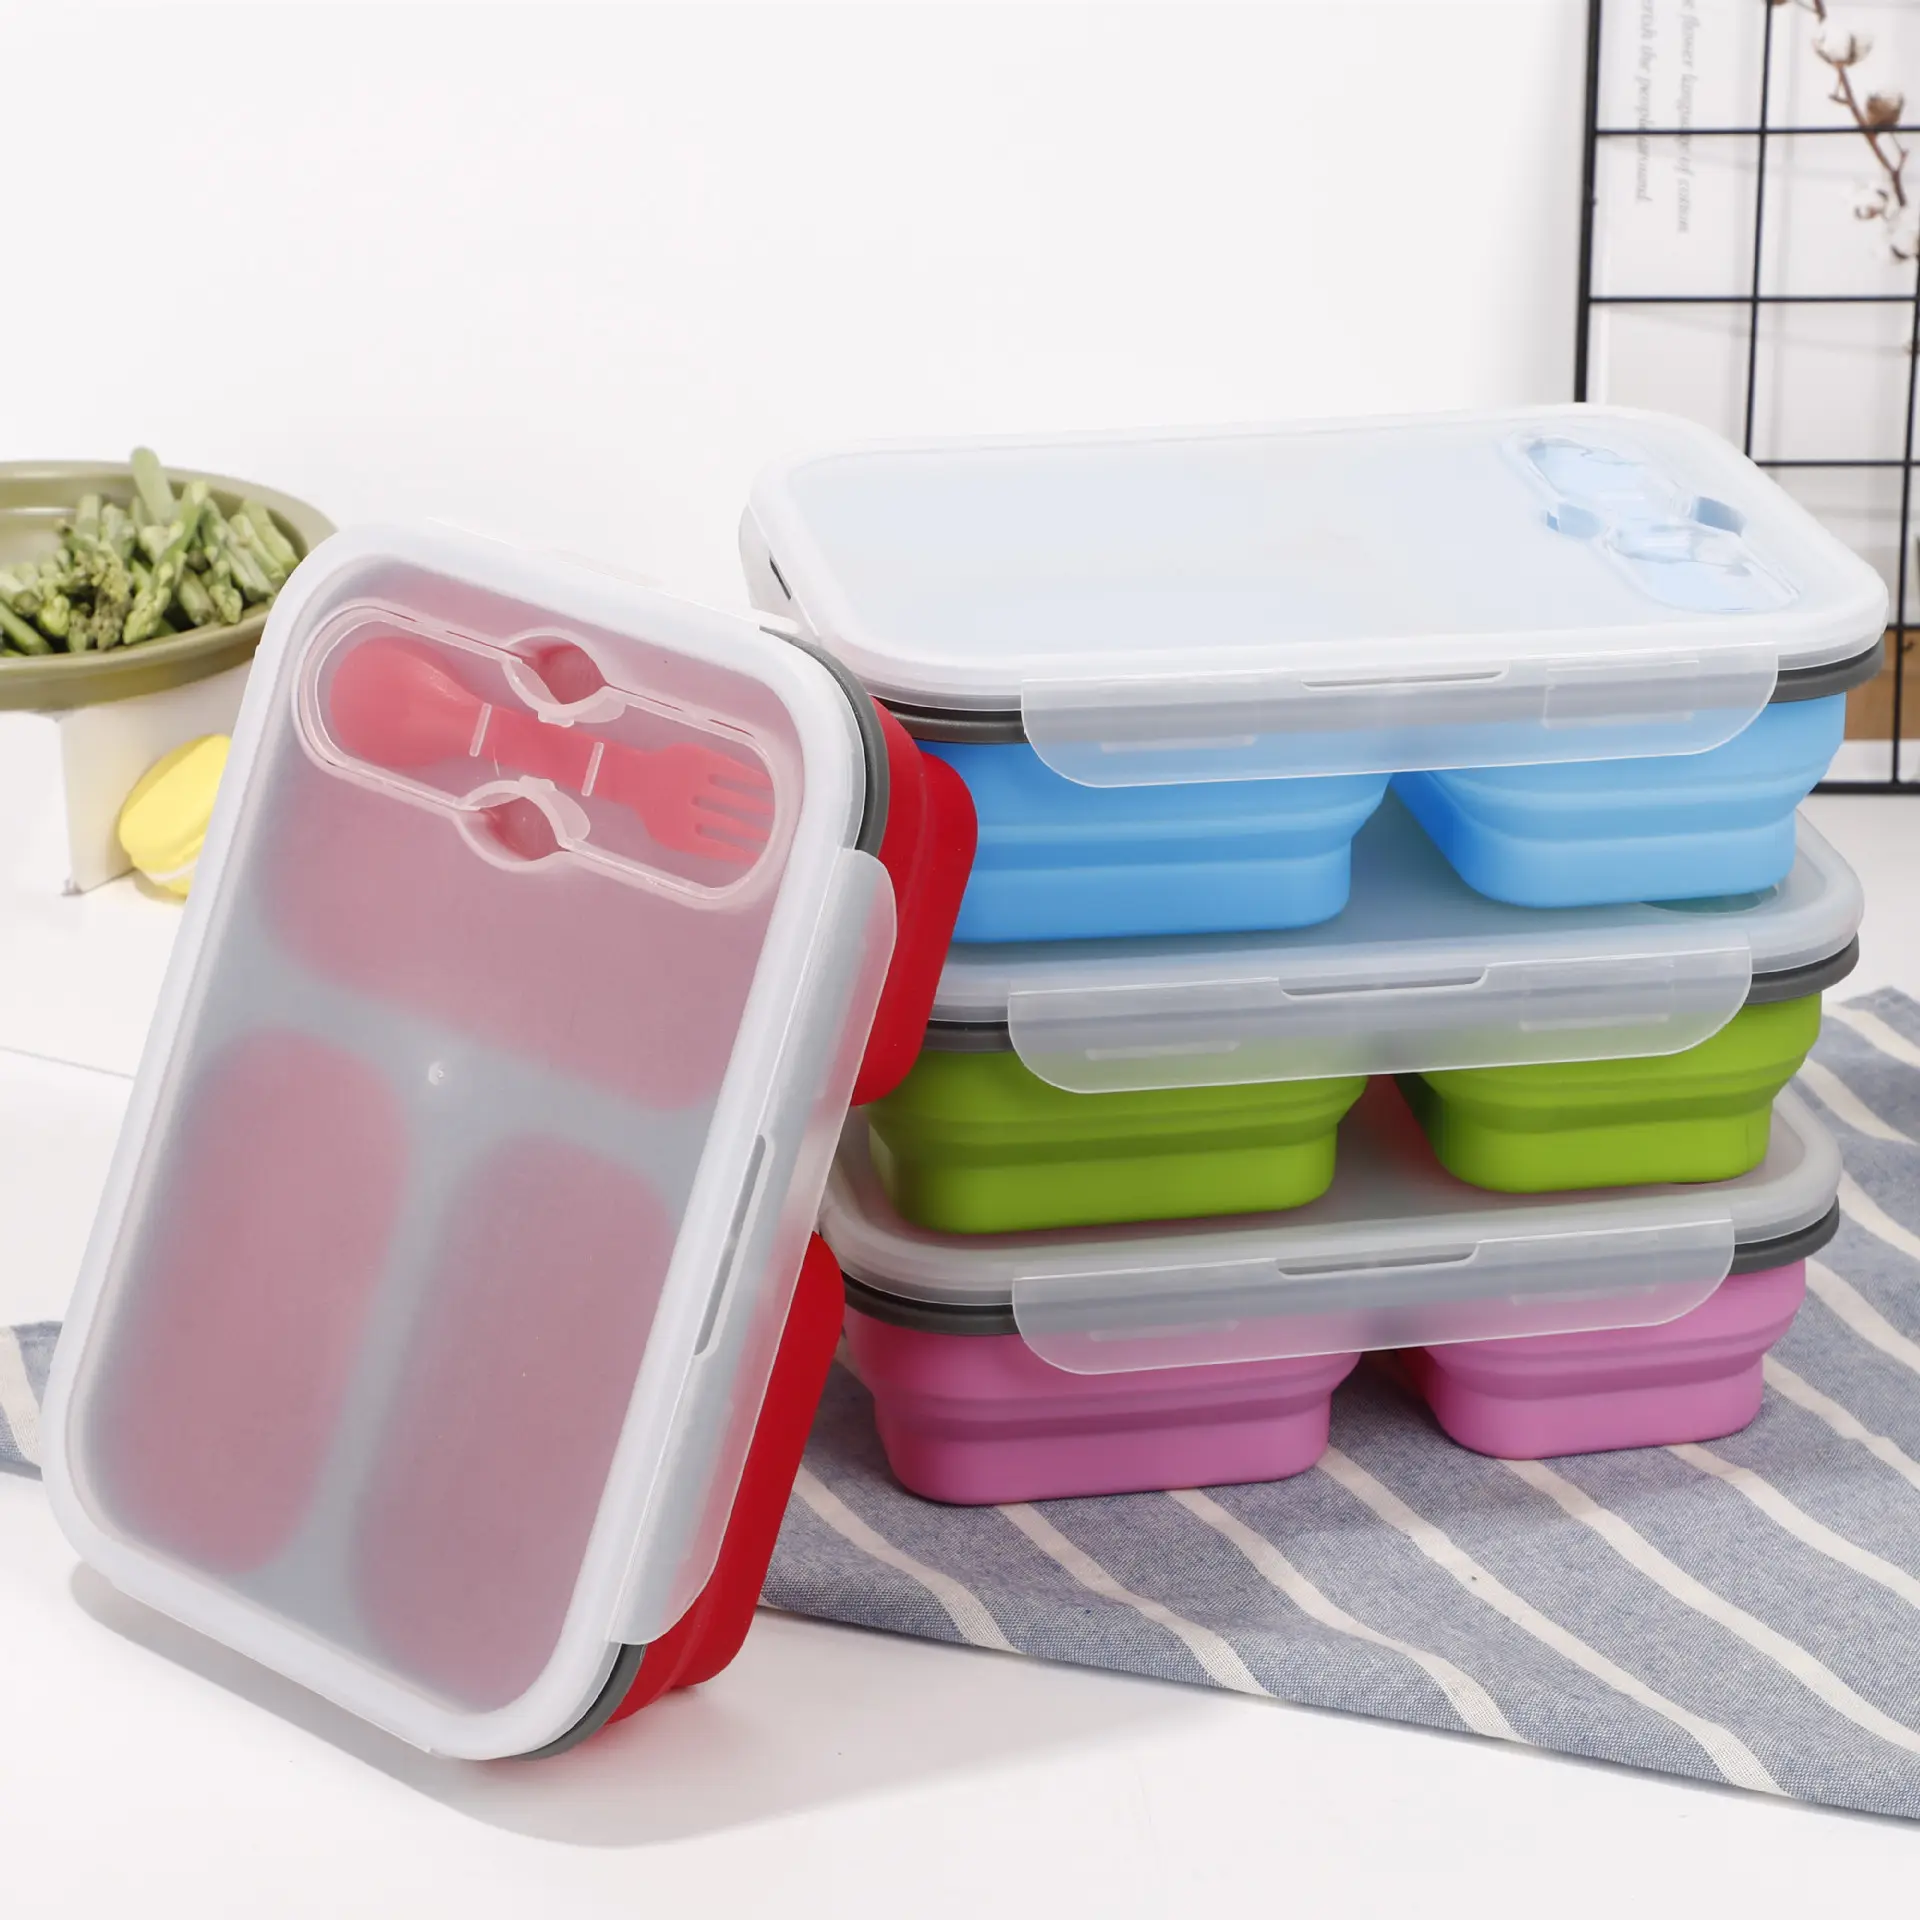 foldable silicone lunch box 3 Compartment kids lunch box set collapsible baby food storage containers set with lids